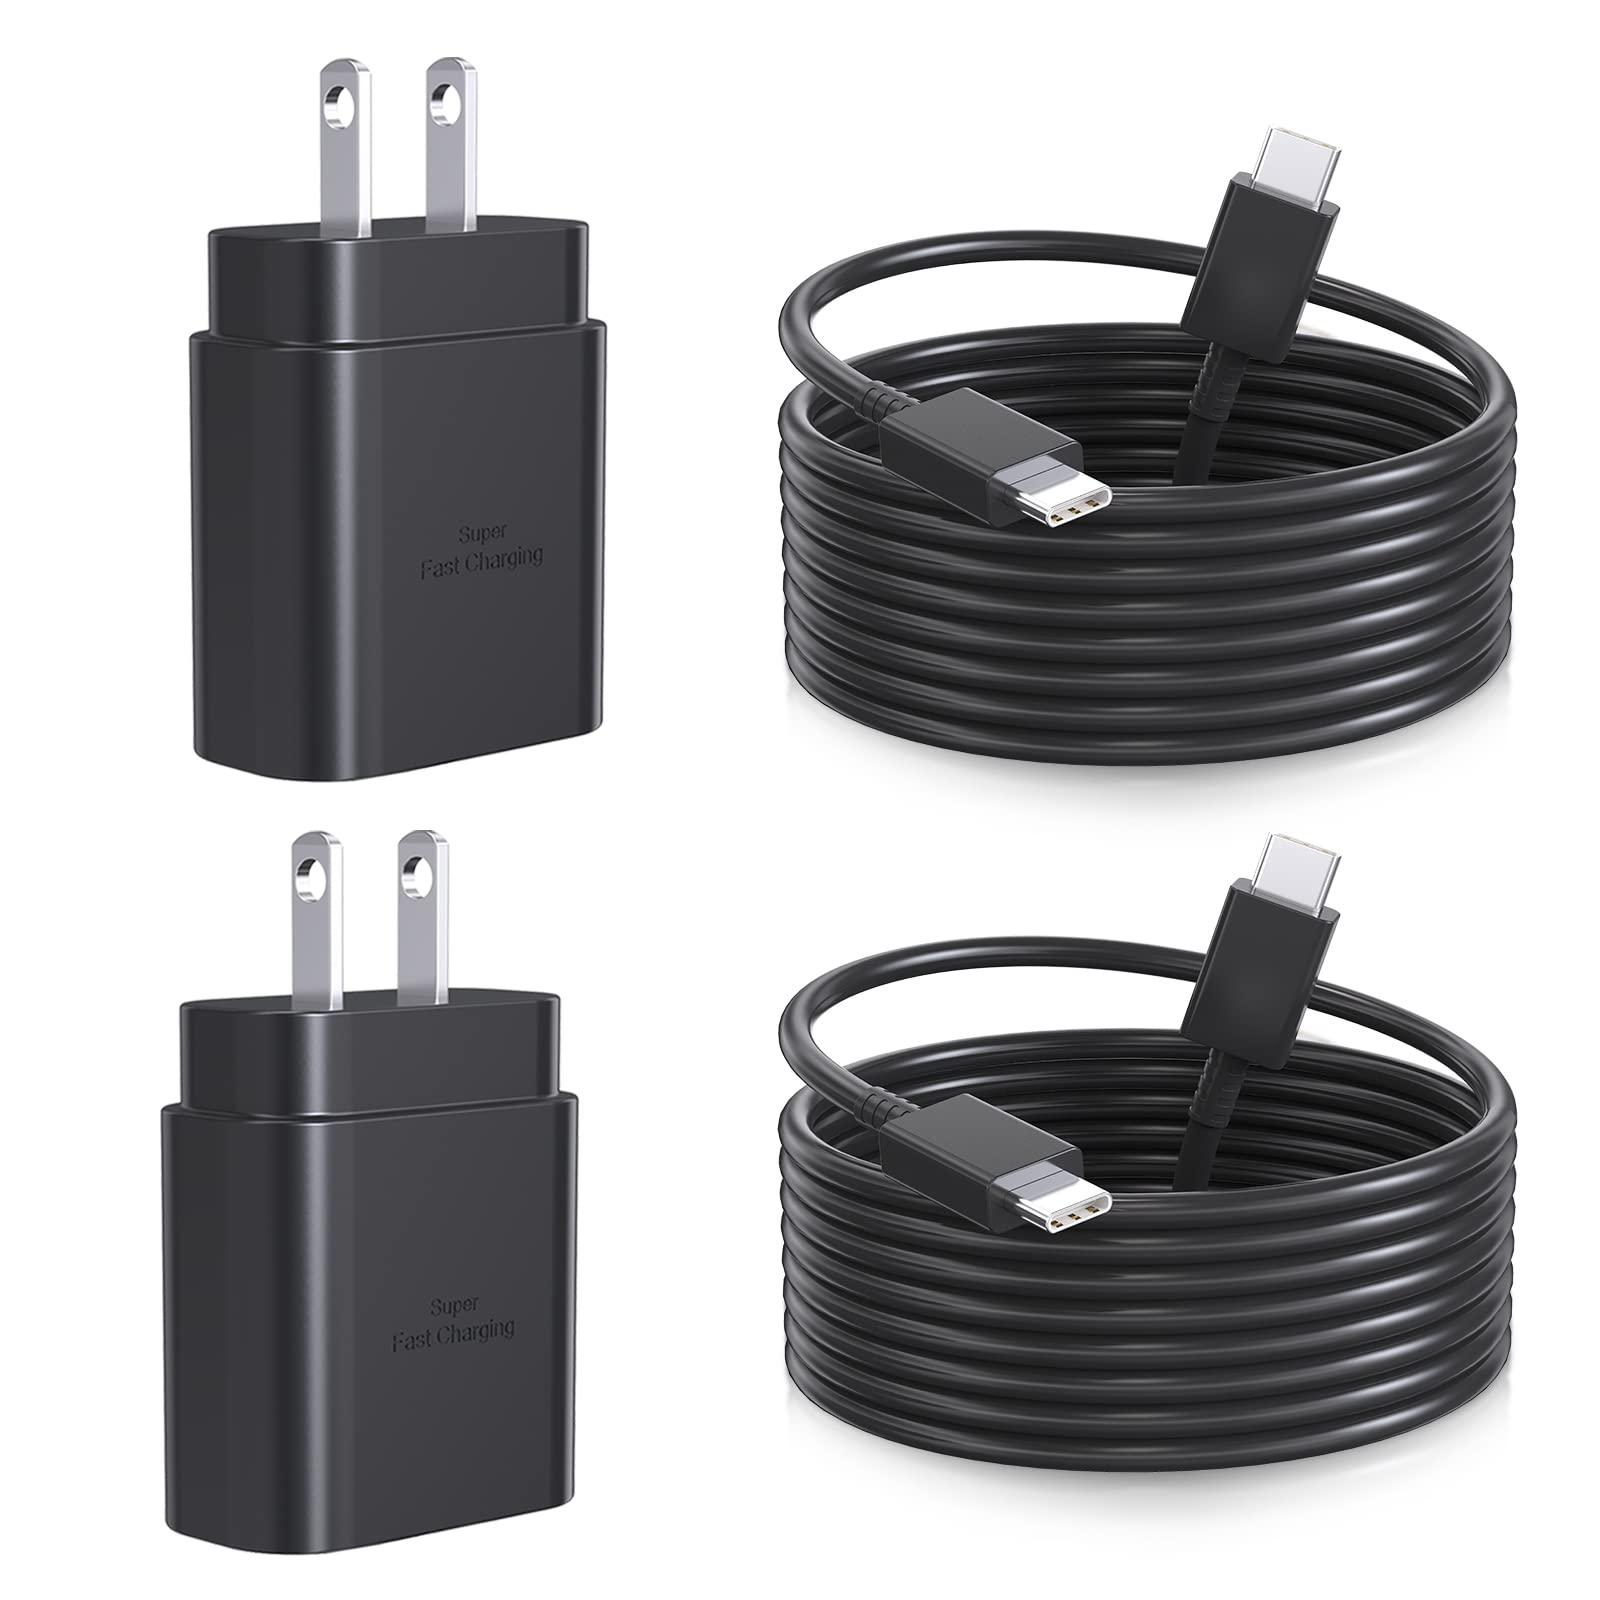 charger-compatibility-finding-the-right-type-for-your-phone